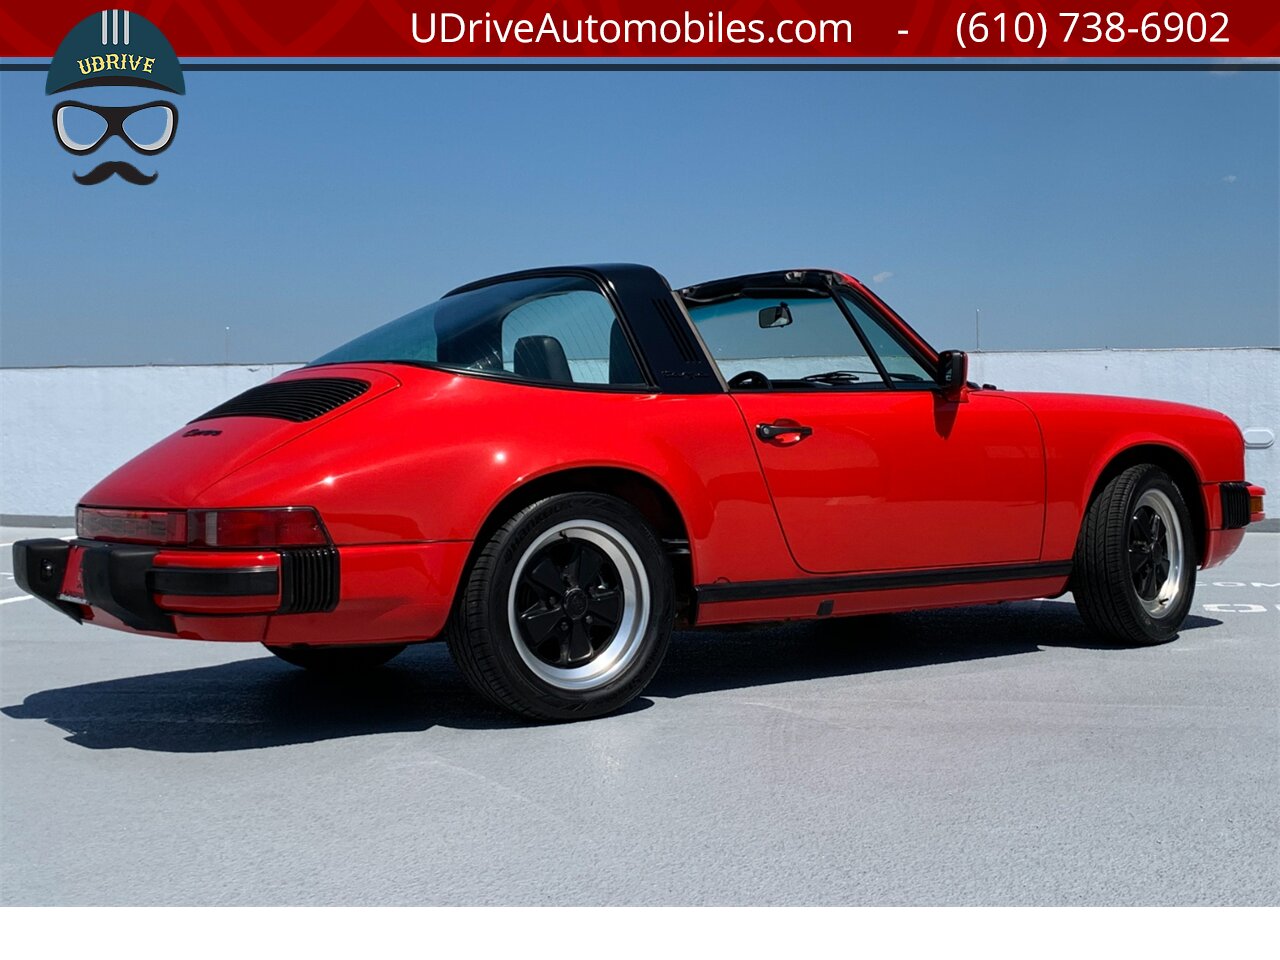 1986 Porsche 911 Carrera Targa 39k Miles Same Owner Since 1988  $23k in Service History Since 2011 - Photo 3 - West Chester, PA 19382